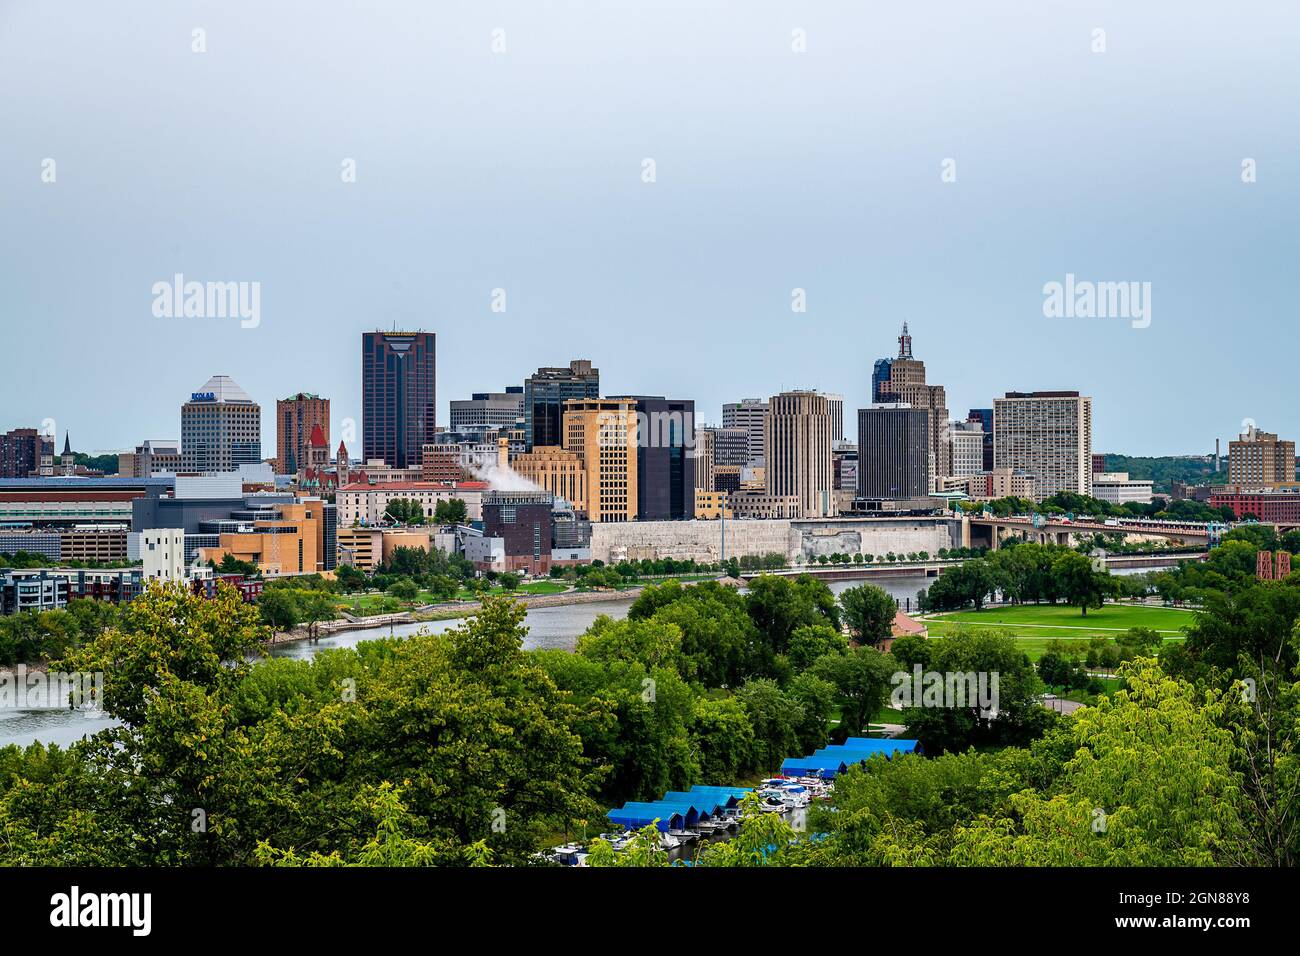 Downtown St Paul Framed By The High Bridge Stock Photo - Download Image Now  - St. Paul - Minnesota, Minnesota, Downtown District - iStock